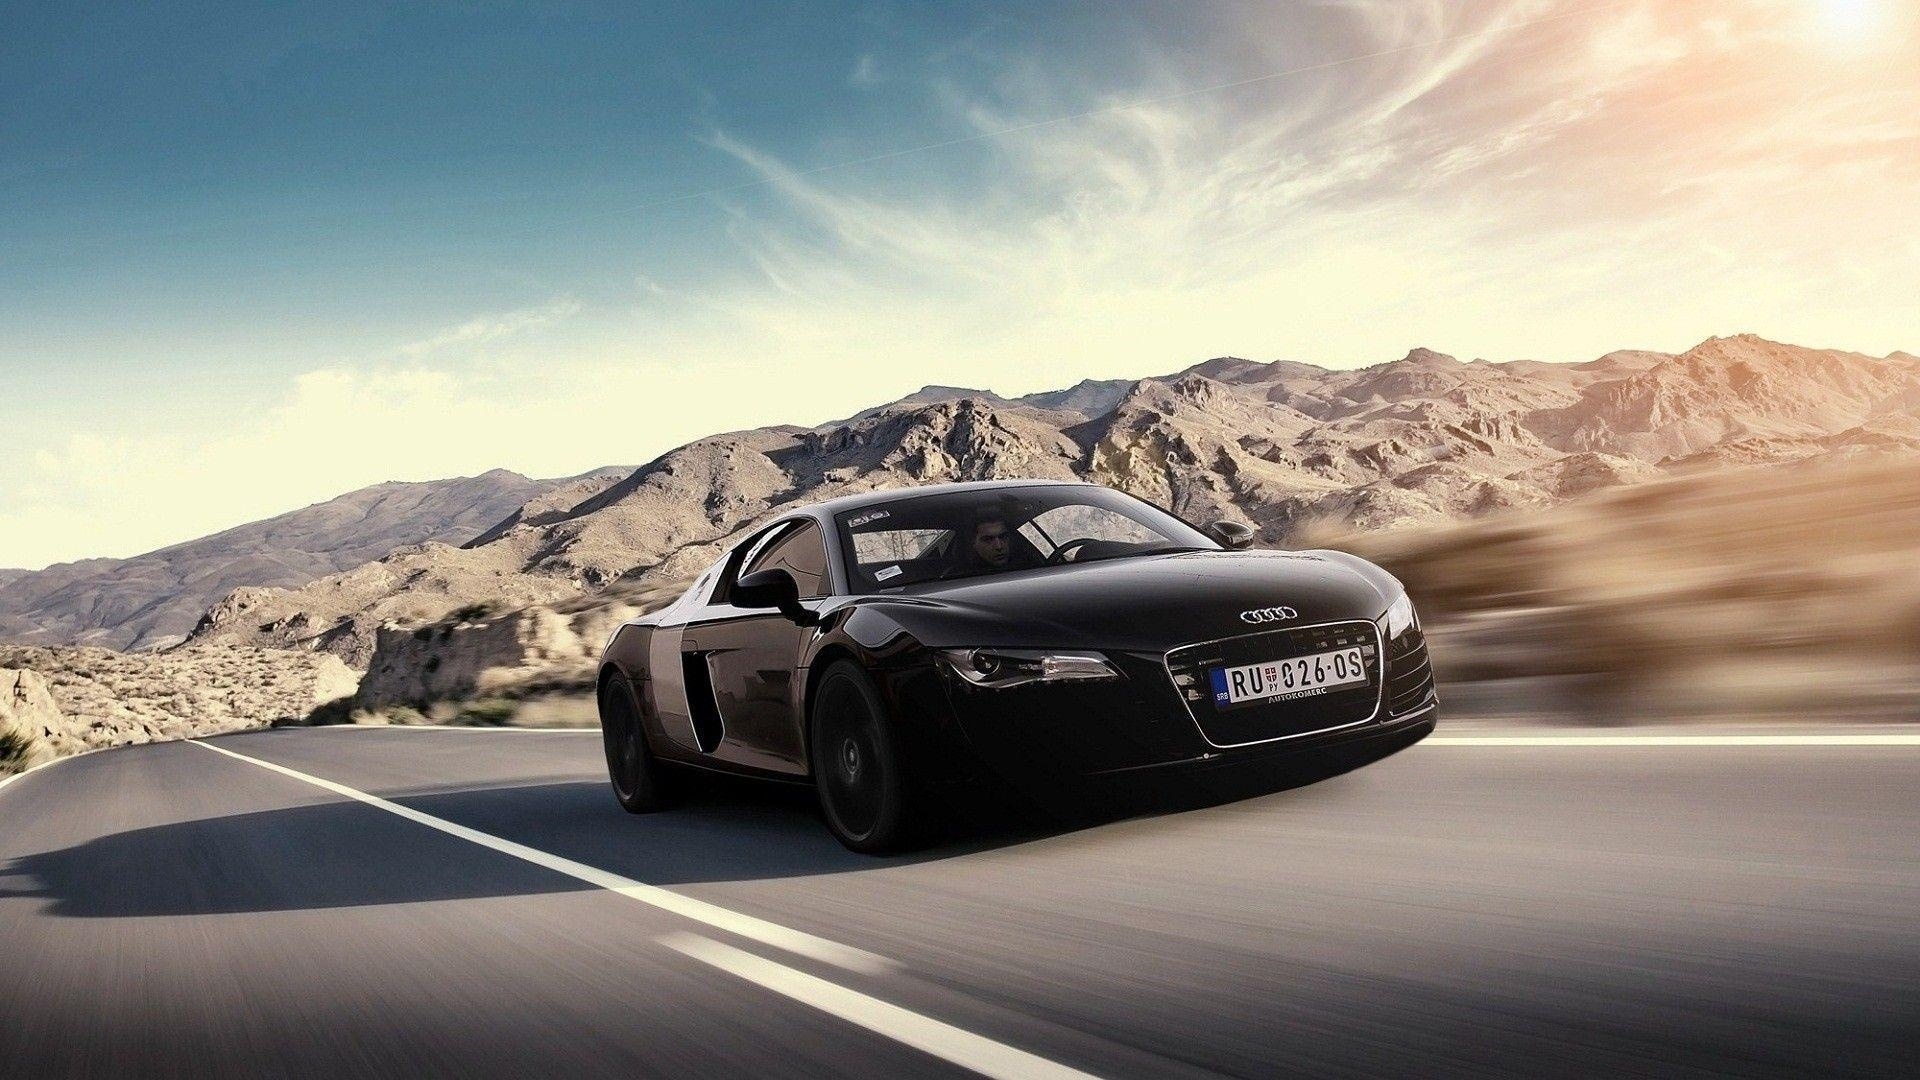 Audi R8 cool background